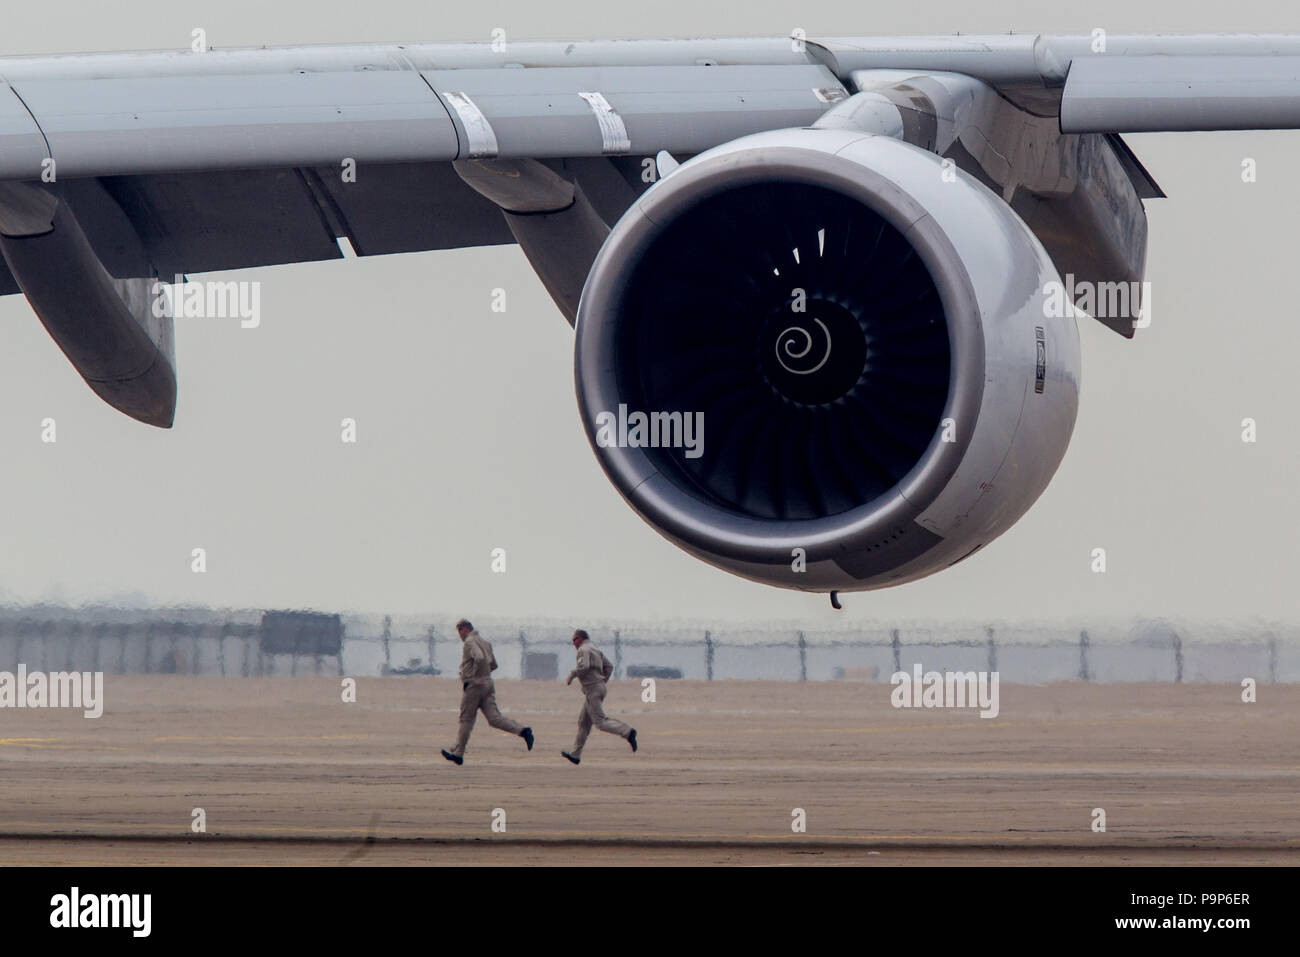 Two men run behind the Rolls-Royce Trent 900 engine at the Airshow China 2014 in Zhuhai, China Stock Photo